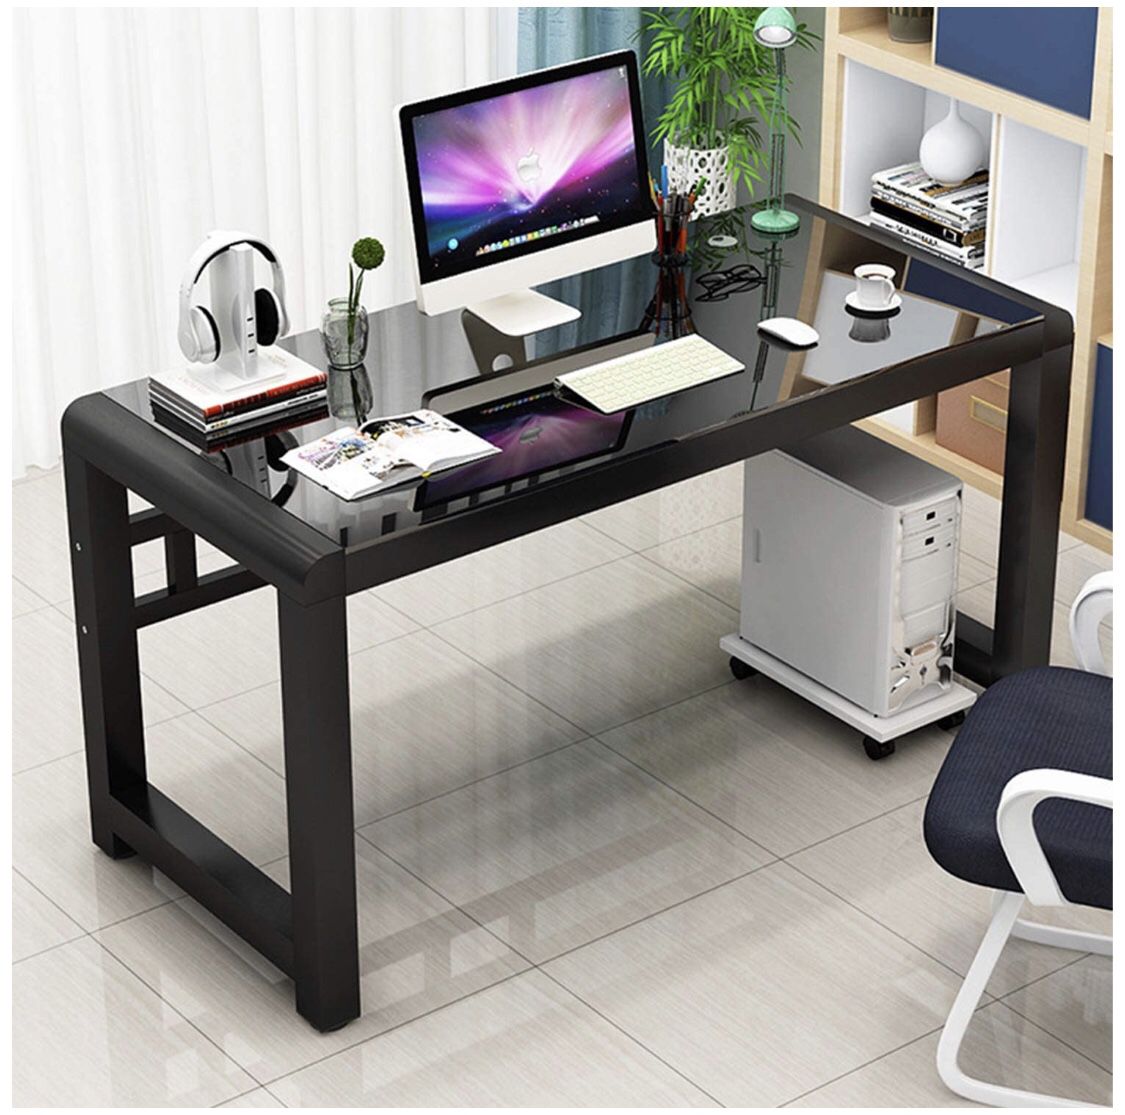 New in box 47” sturdy Industrial Computer Writing study Desk gaming table tempered glass top heavy duty